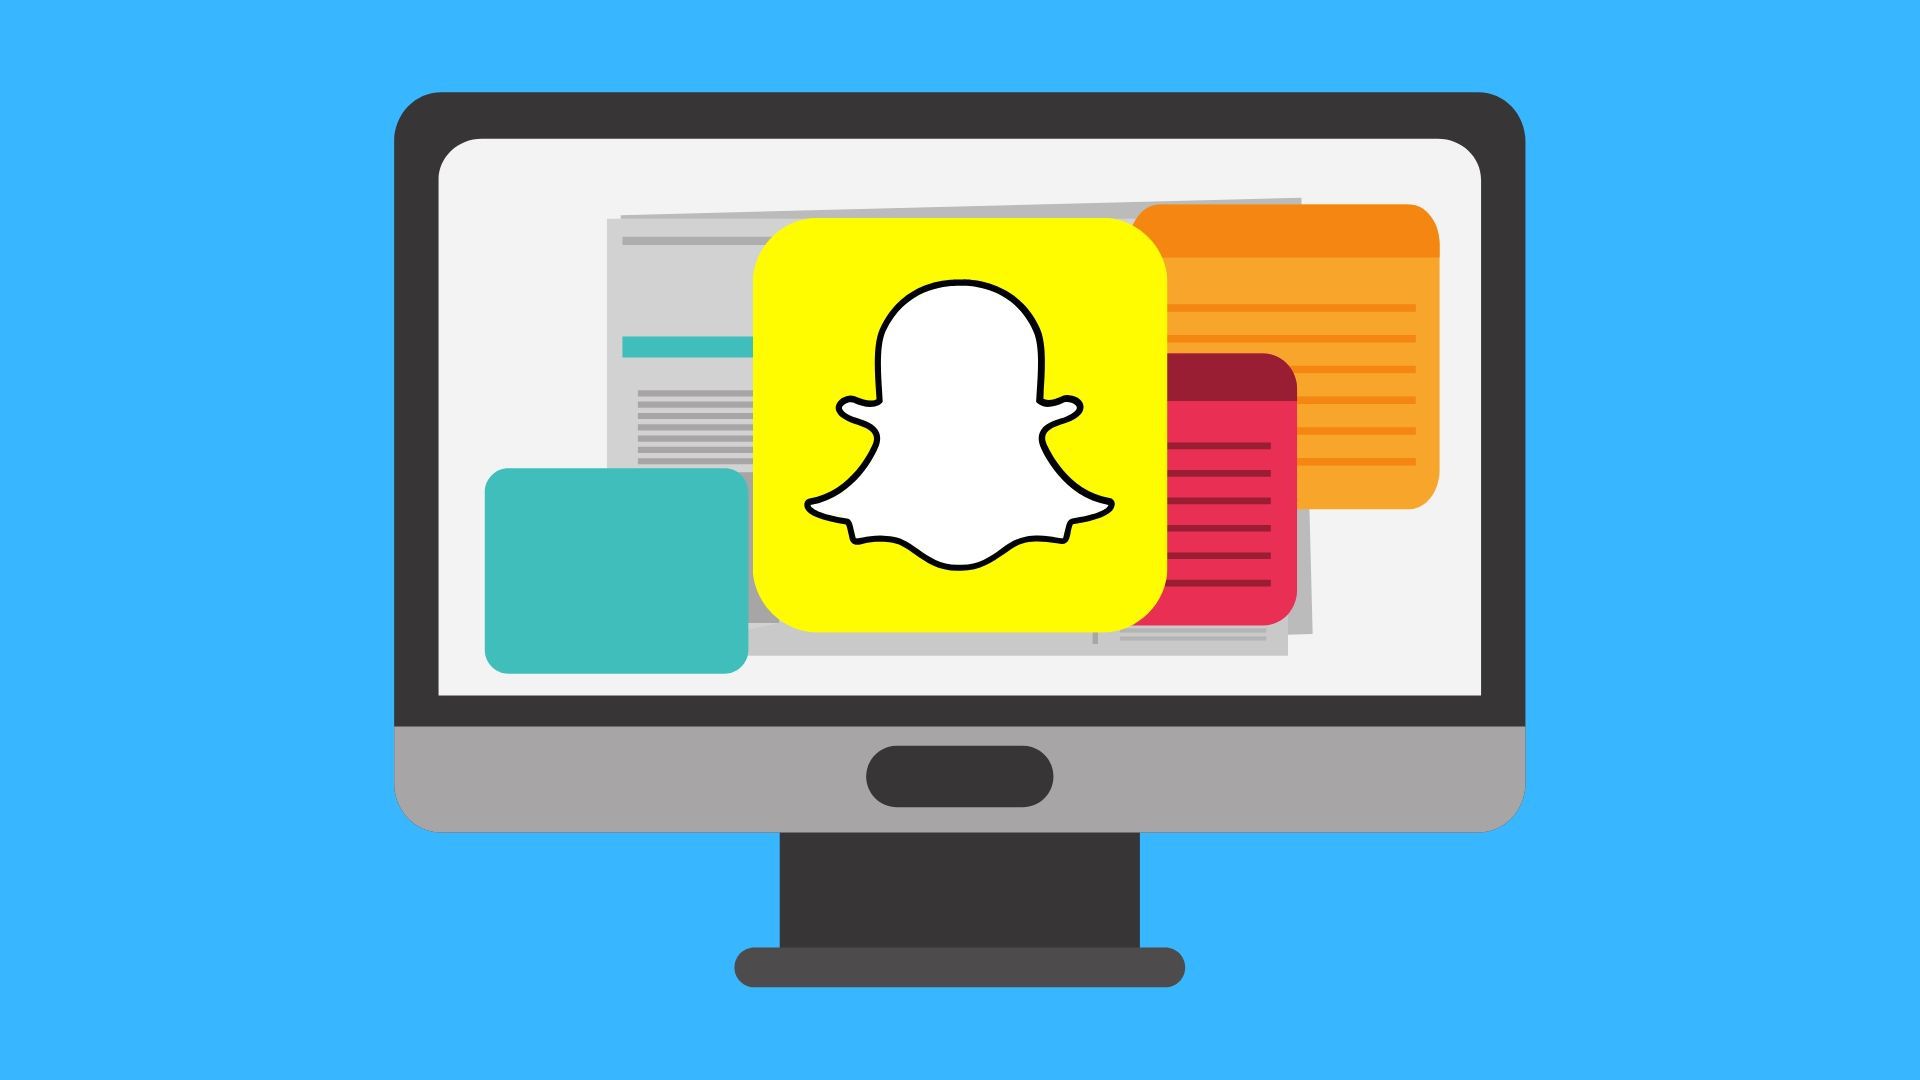 How to Get Snapchat on PC without using Blue stacks